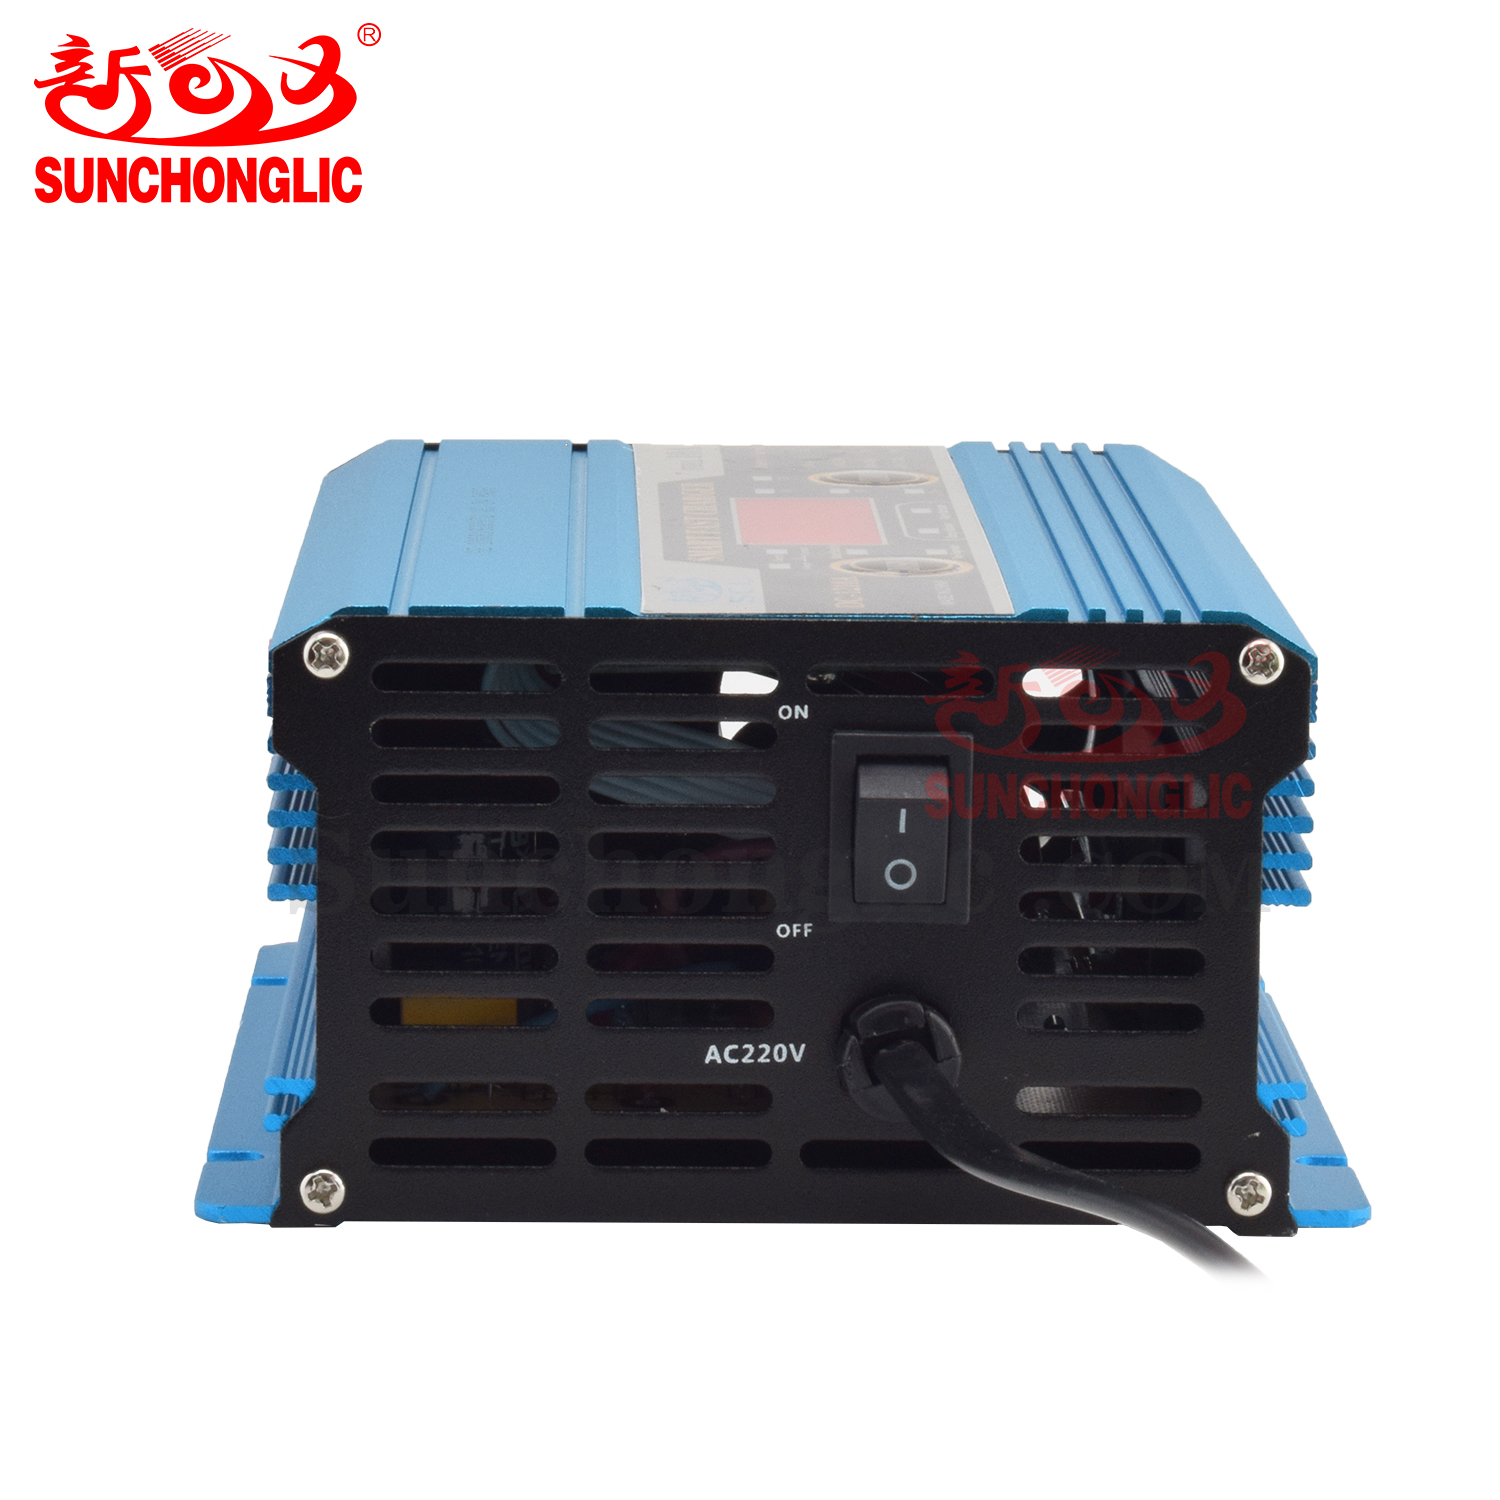 AGM/GEL Battery Charger - DC-1210A